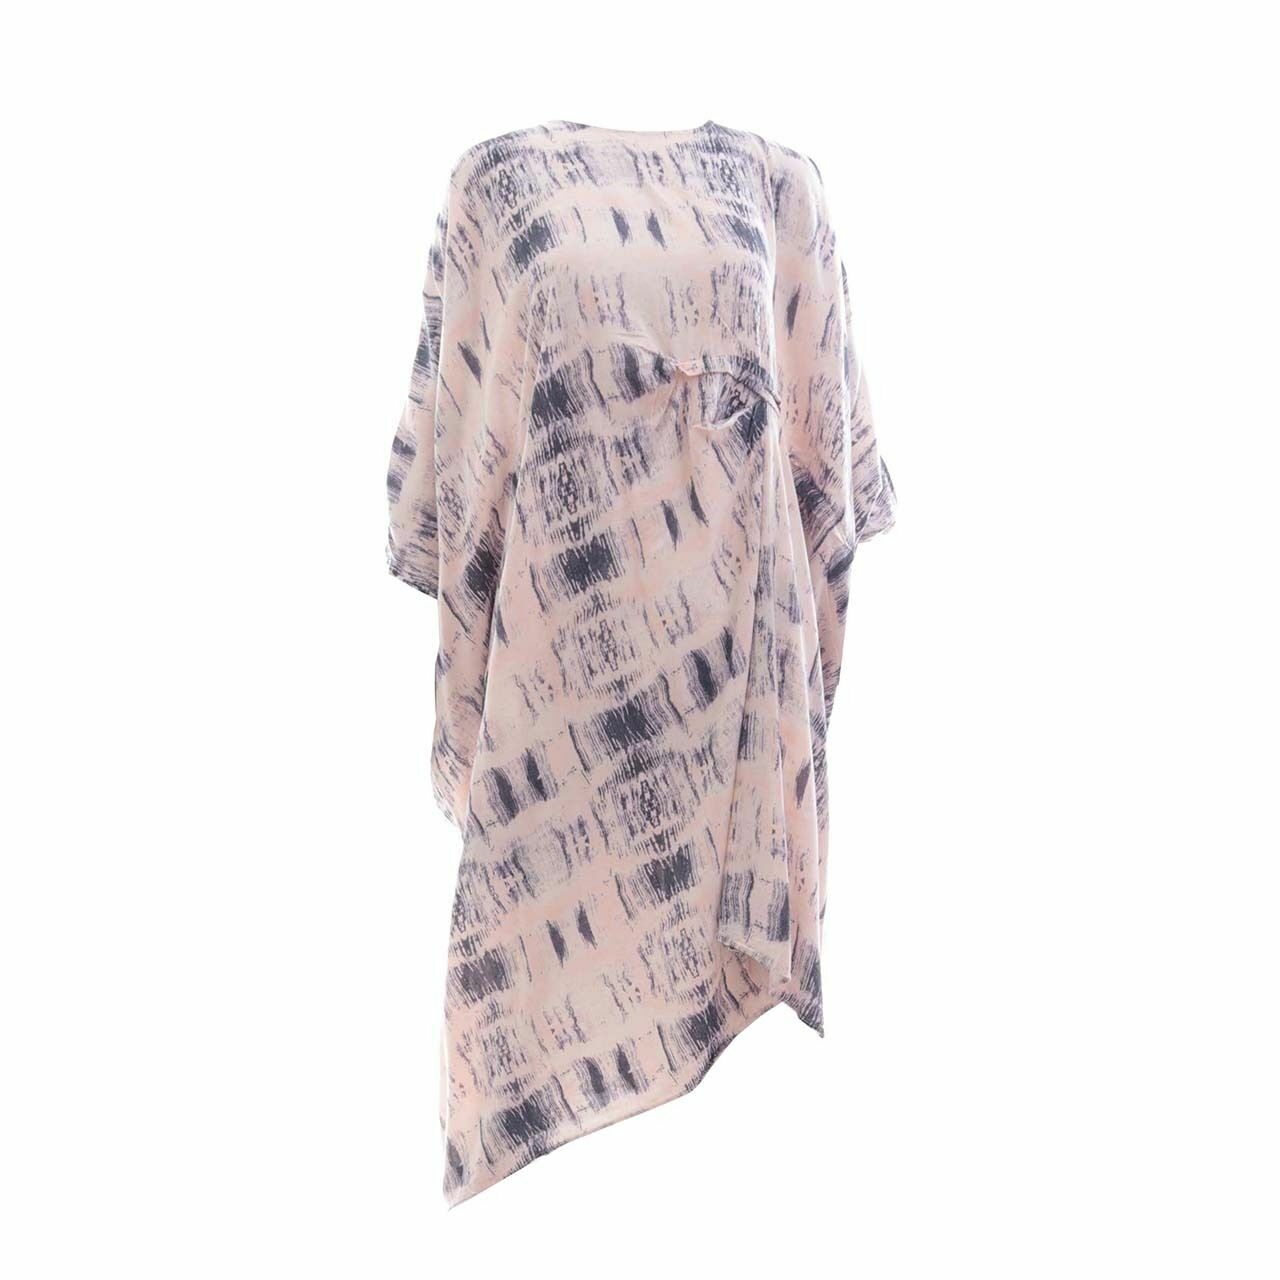 Picnic Pink Patterned Batwing Blouse